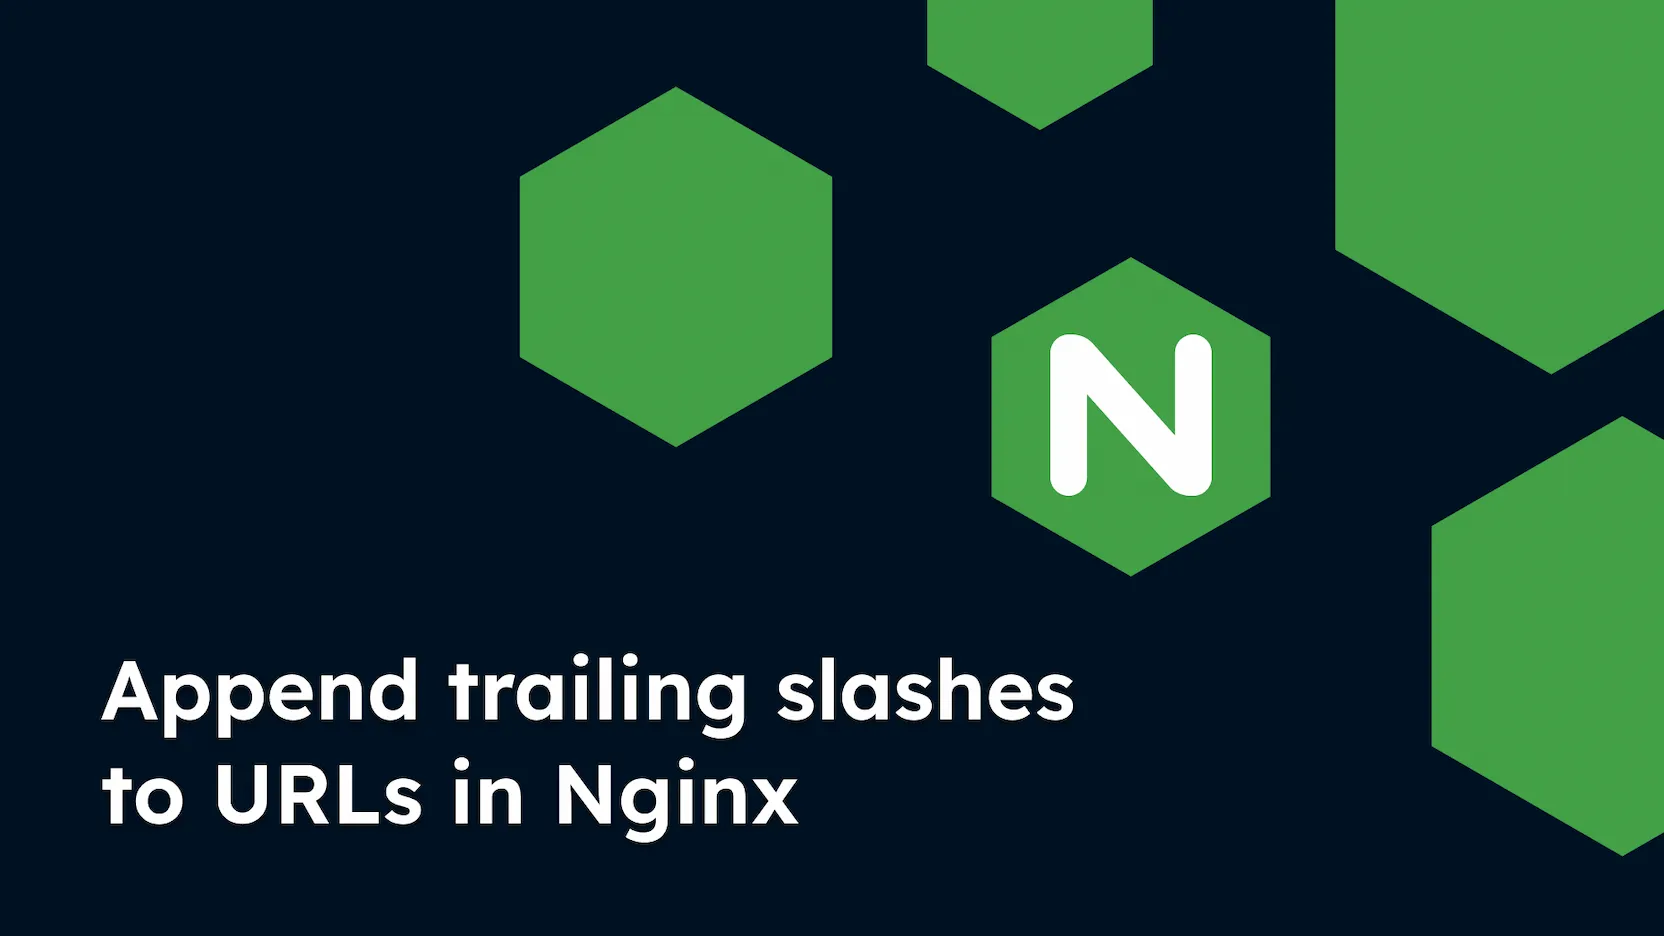 Append trailing slashes to URLs in Nginx